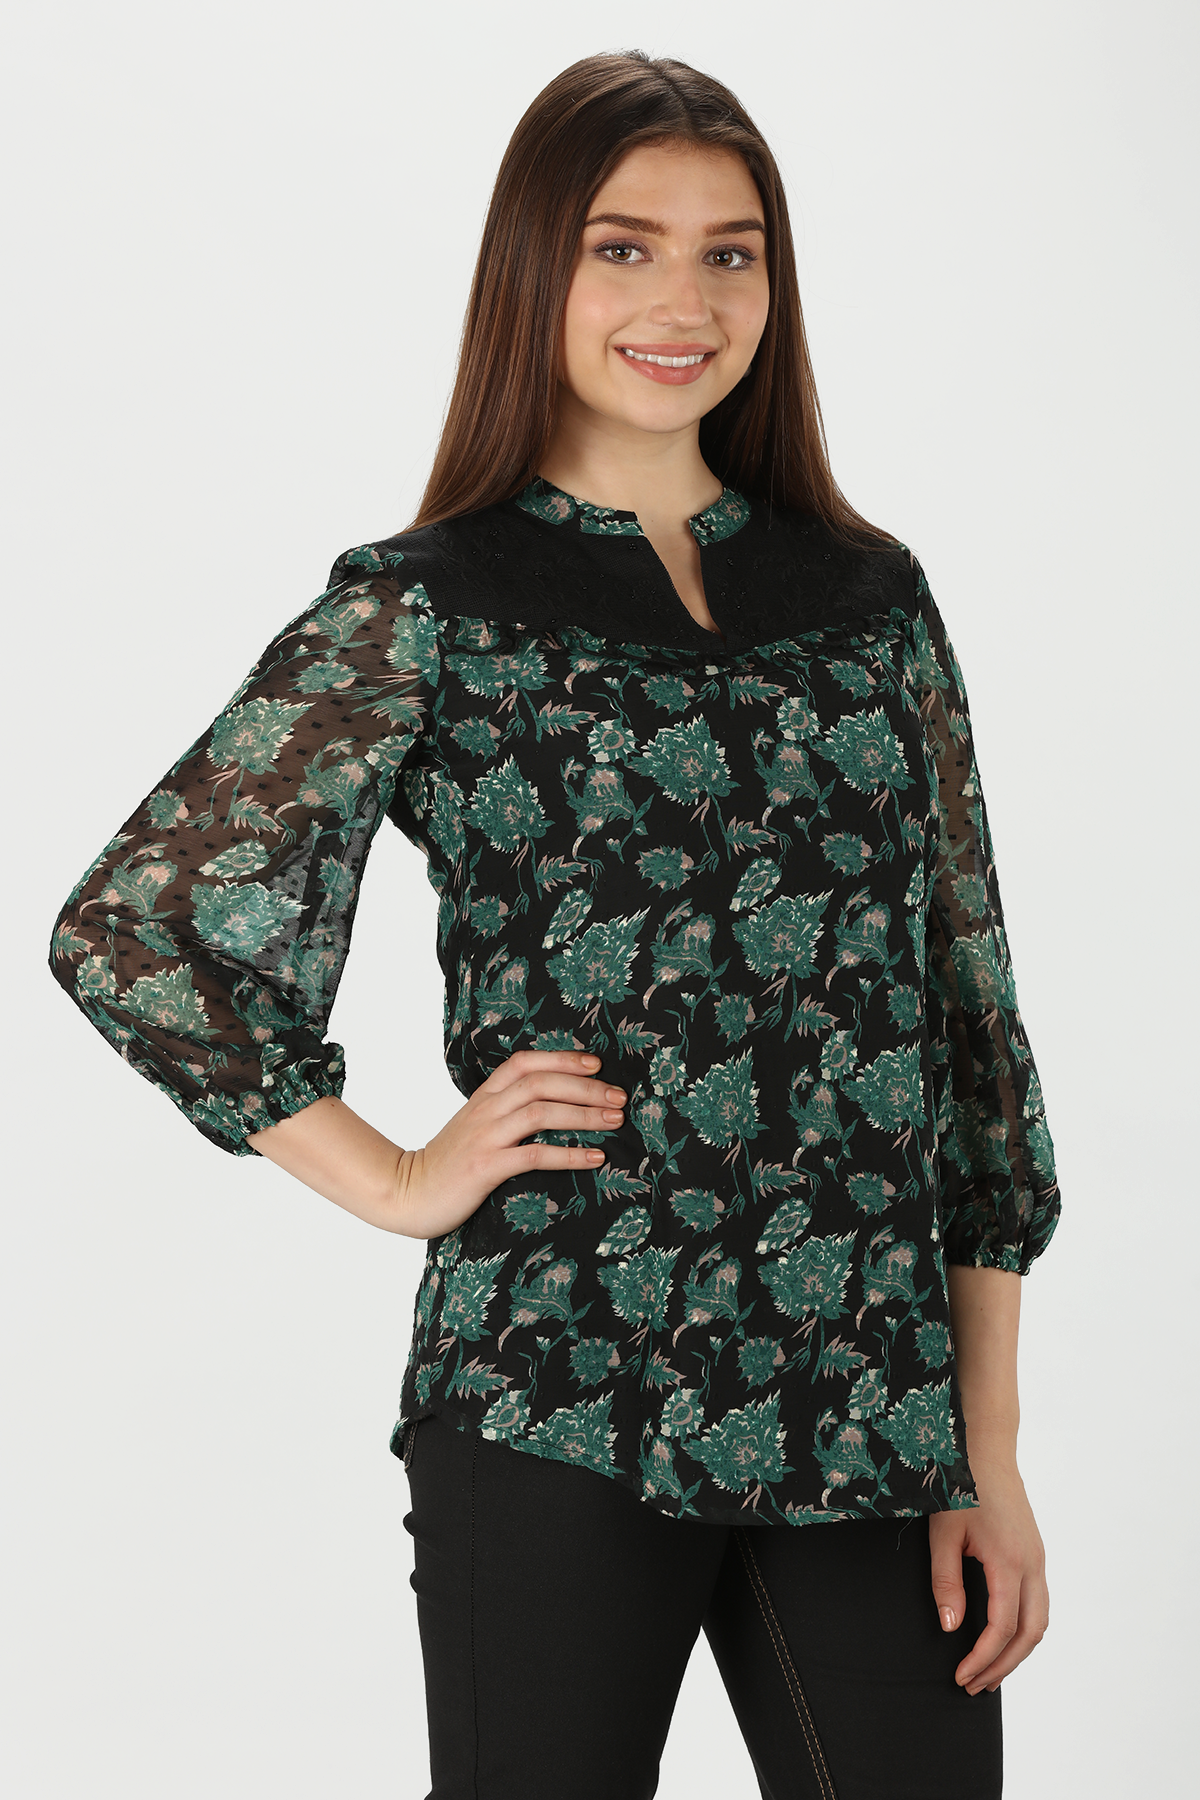 Multicolour Embroidered and Floral Print Top